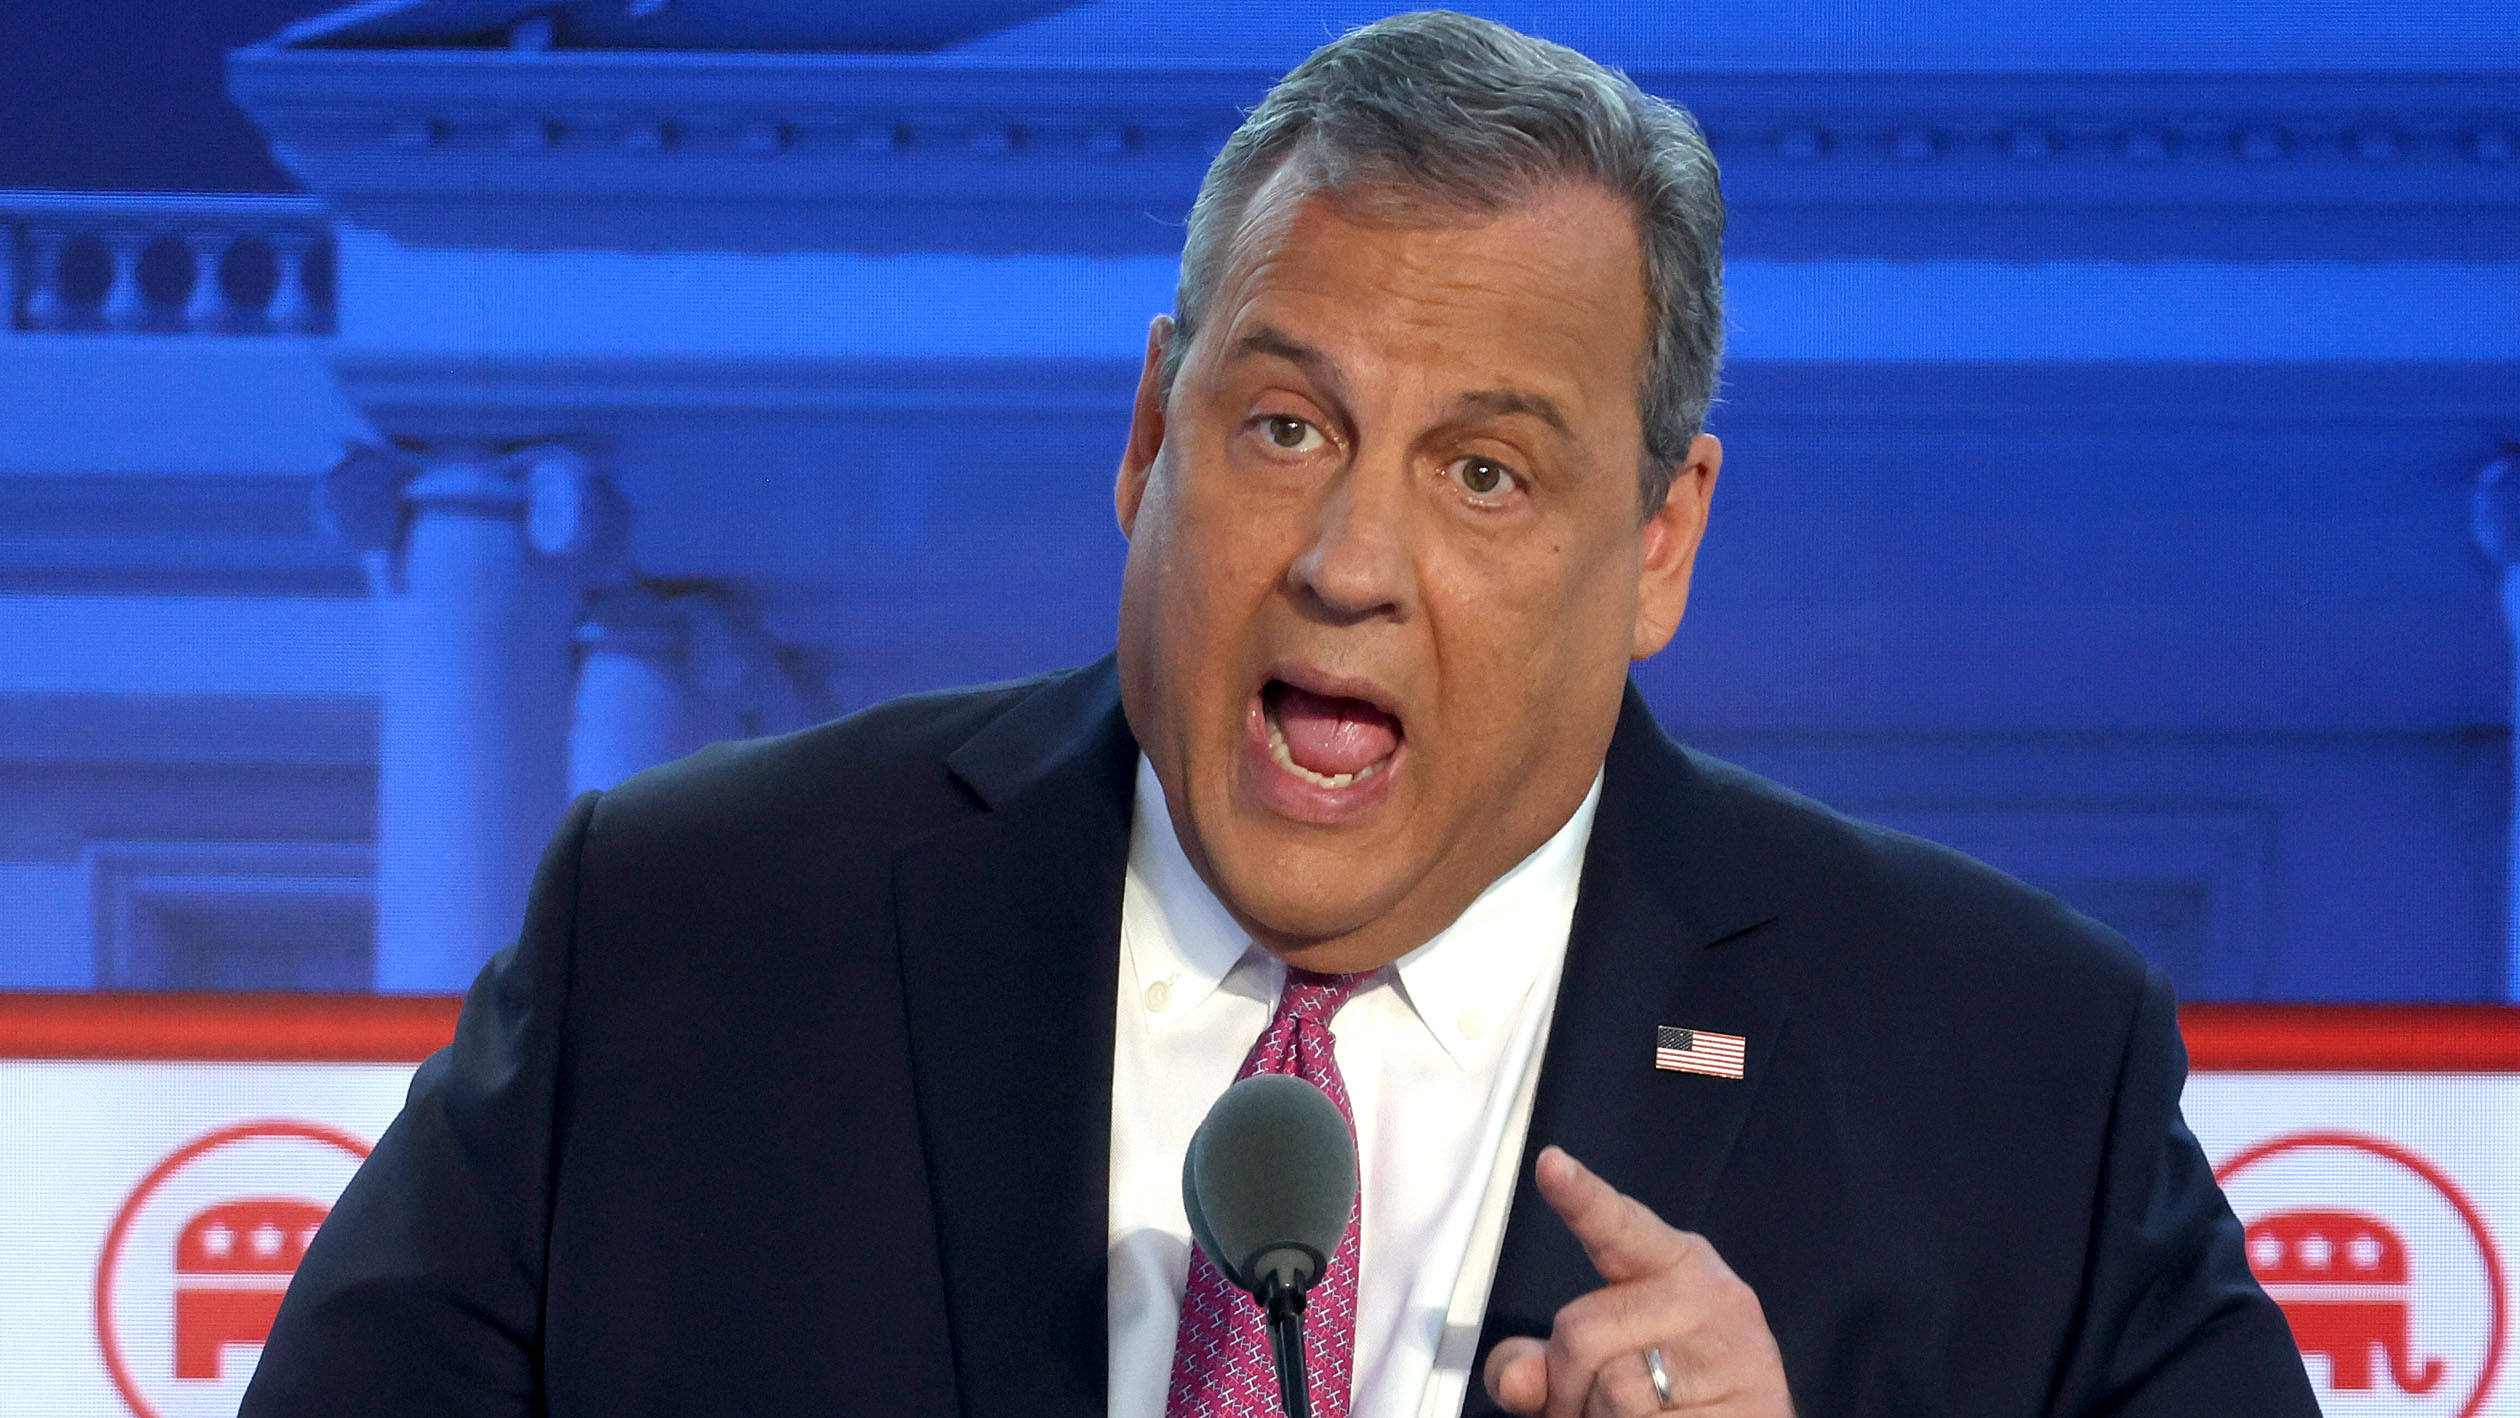 Christie Goes After Trump: If You Keep Skipping Debates, ‘We’re Gonna Call You Donald Duck’